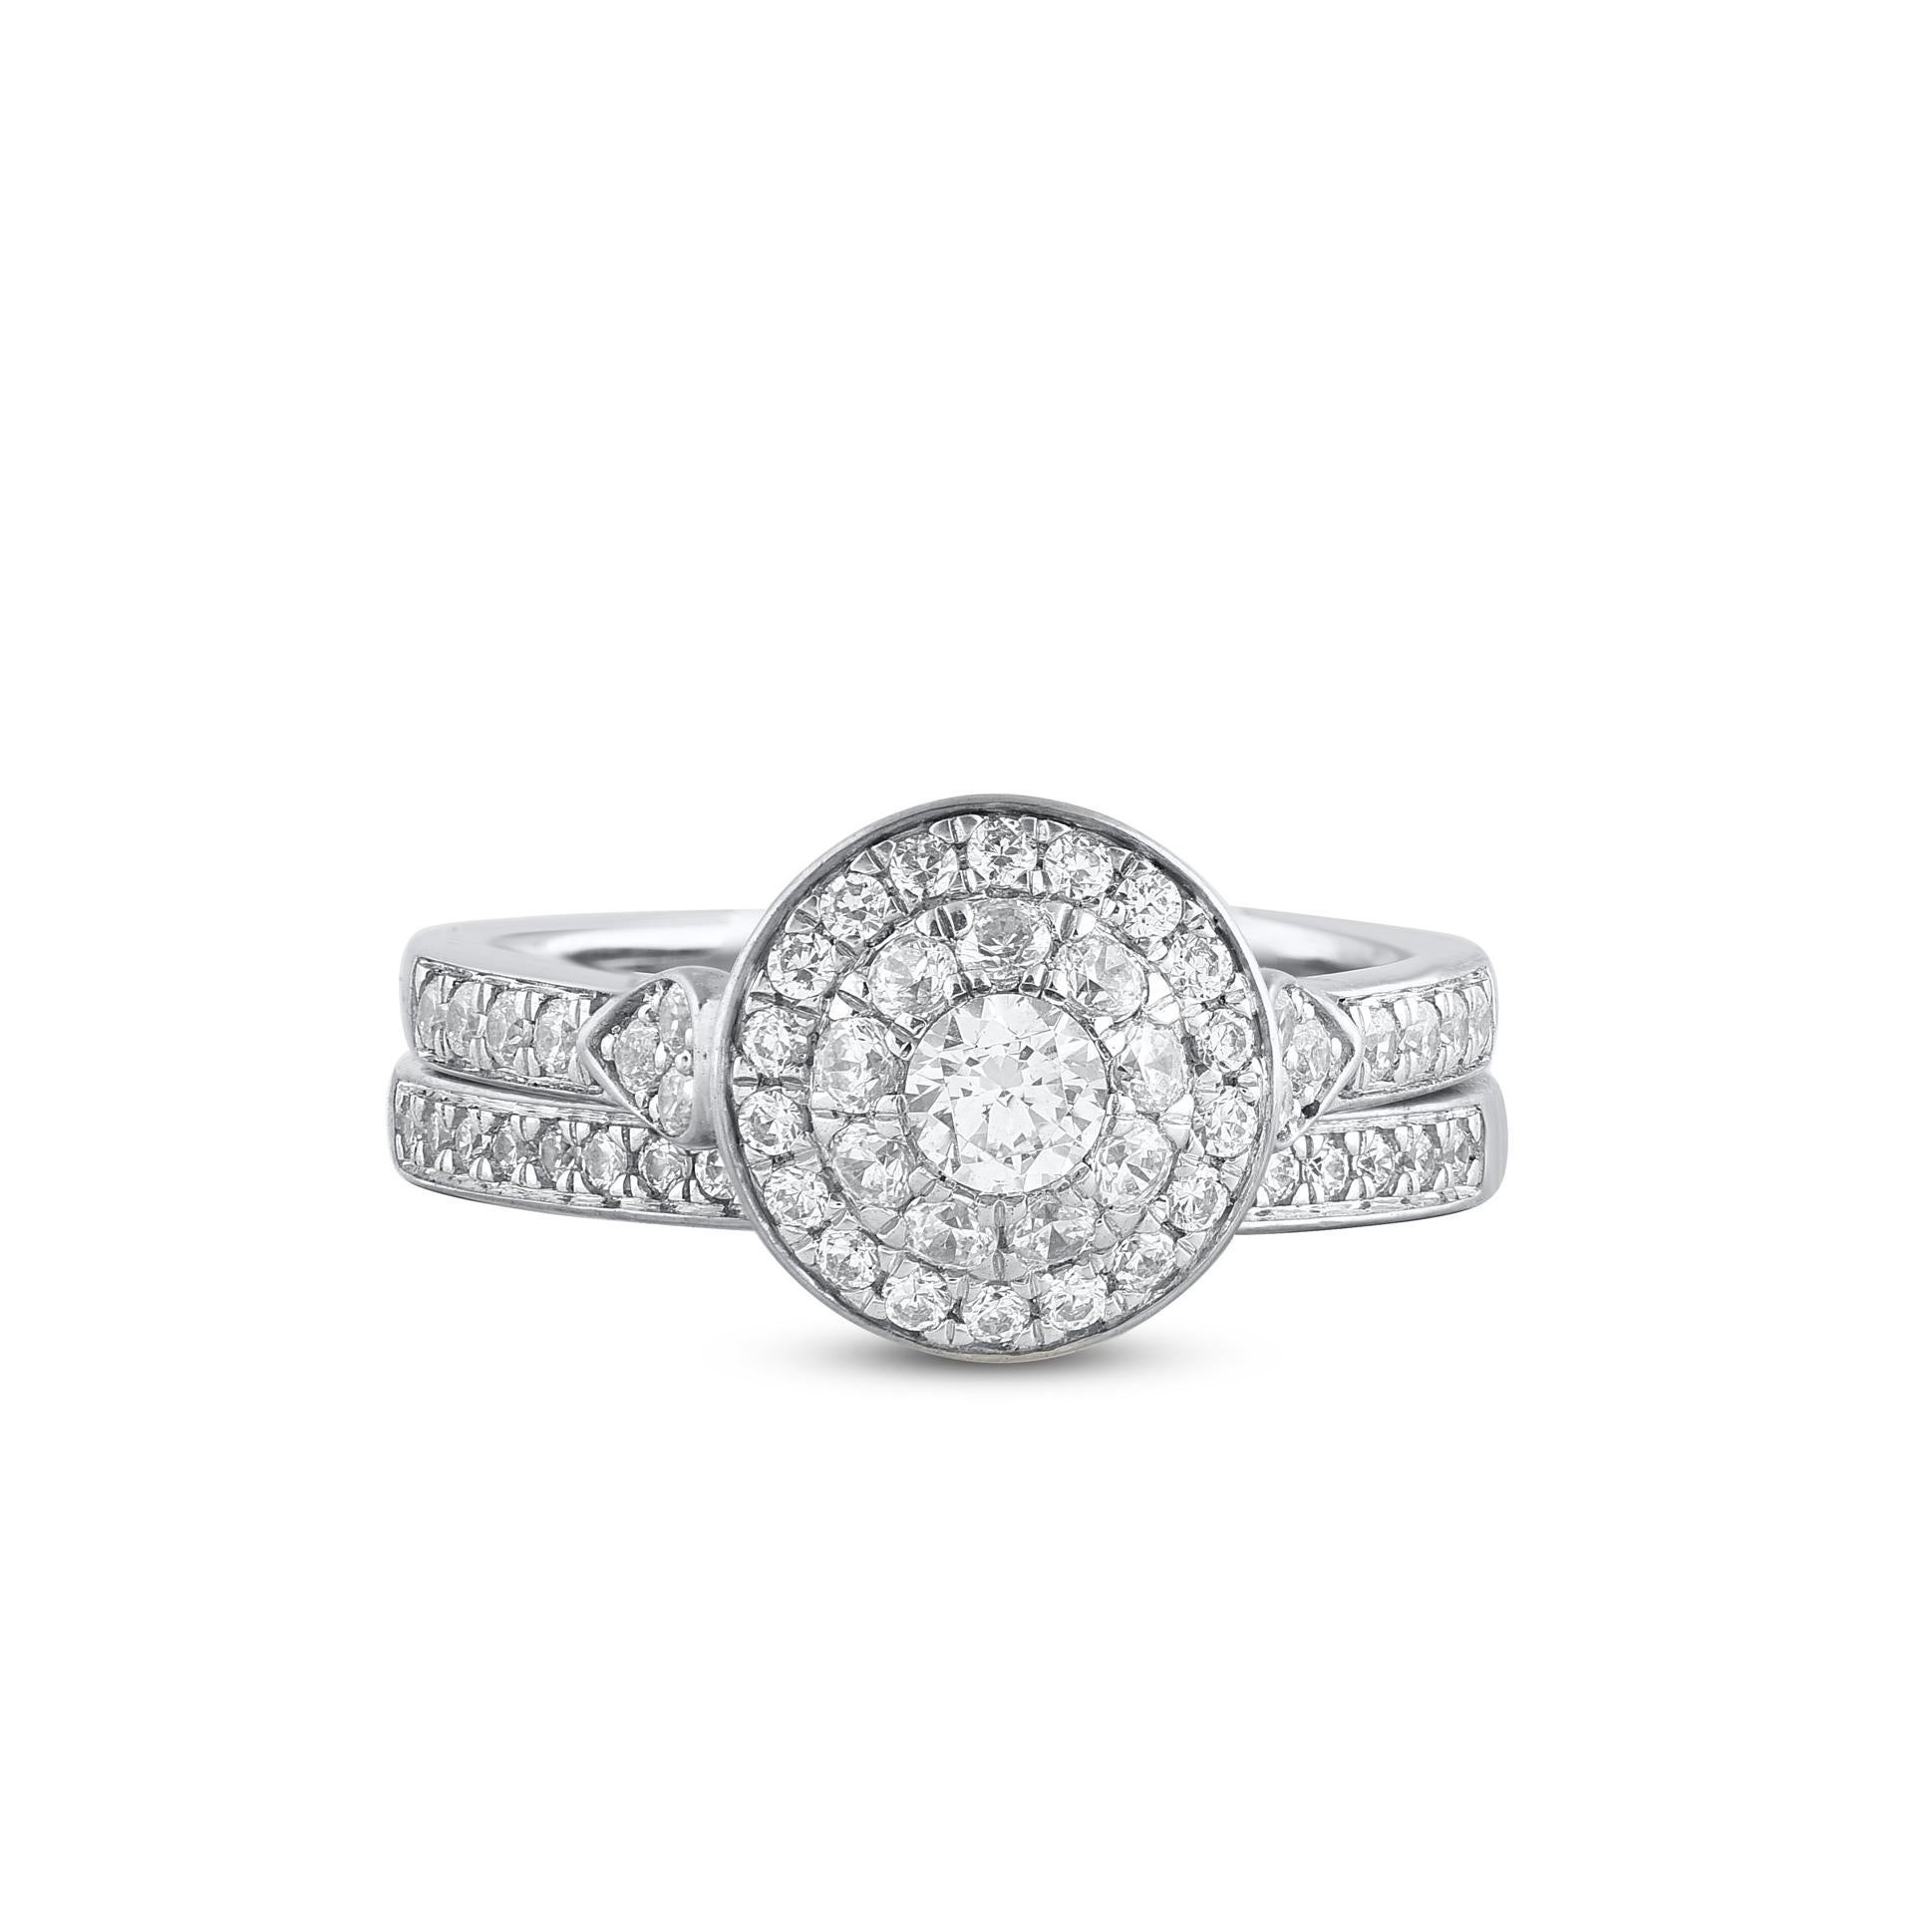 Express your love with this classic and traditional diamond bridal set. Crafted in 14 Karat white gold. This wedding ring features a sparkling 59 brilliant cut round diamonds beautifully set in prong & pave setting. The total diamond weight is 1.0